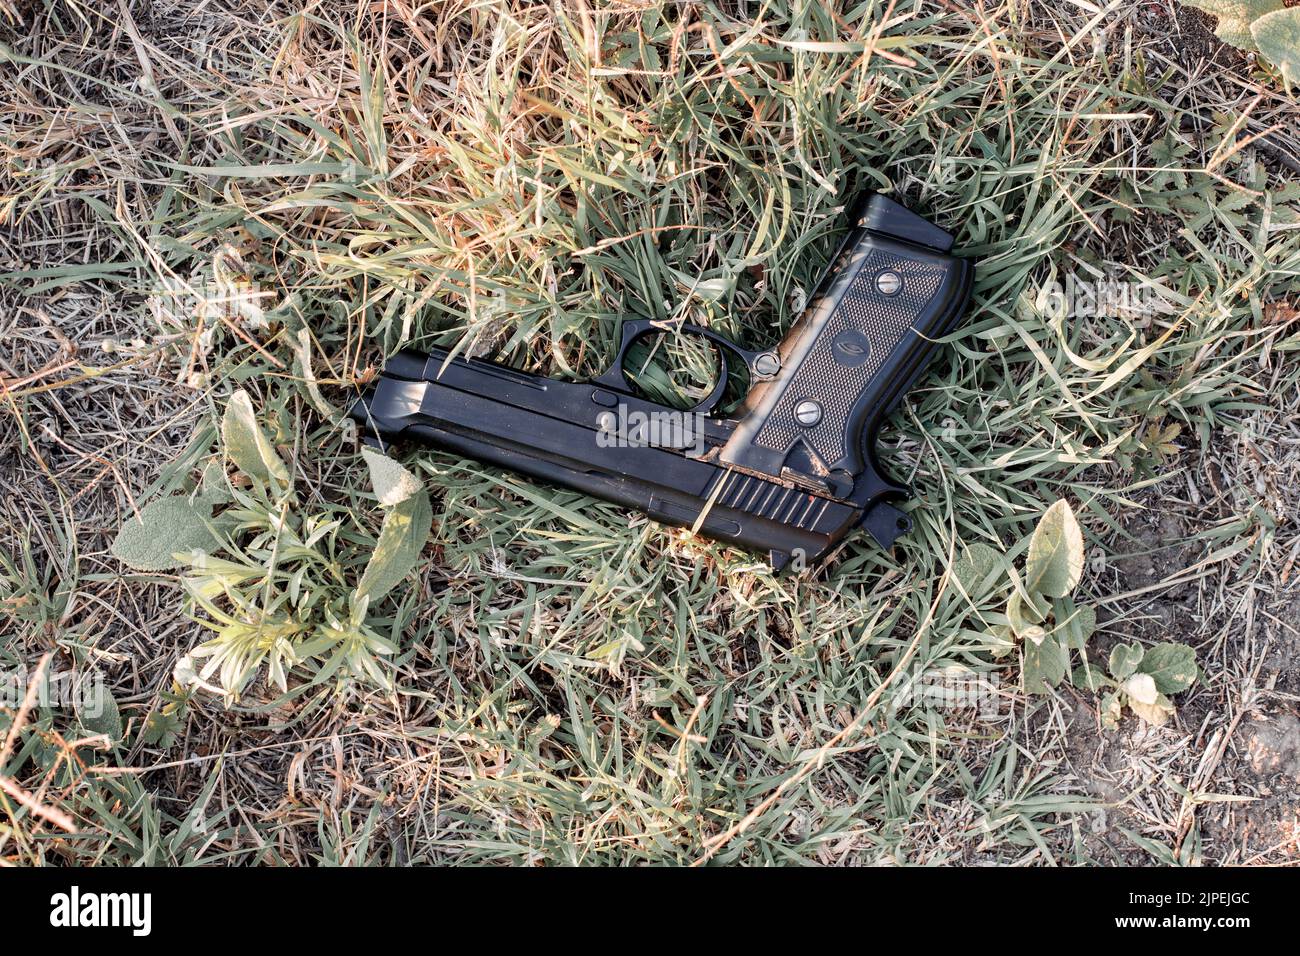 The black pistol is on the ground. Firearms on the street. Stock Photo